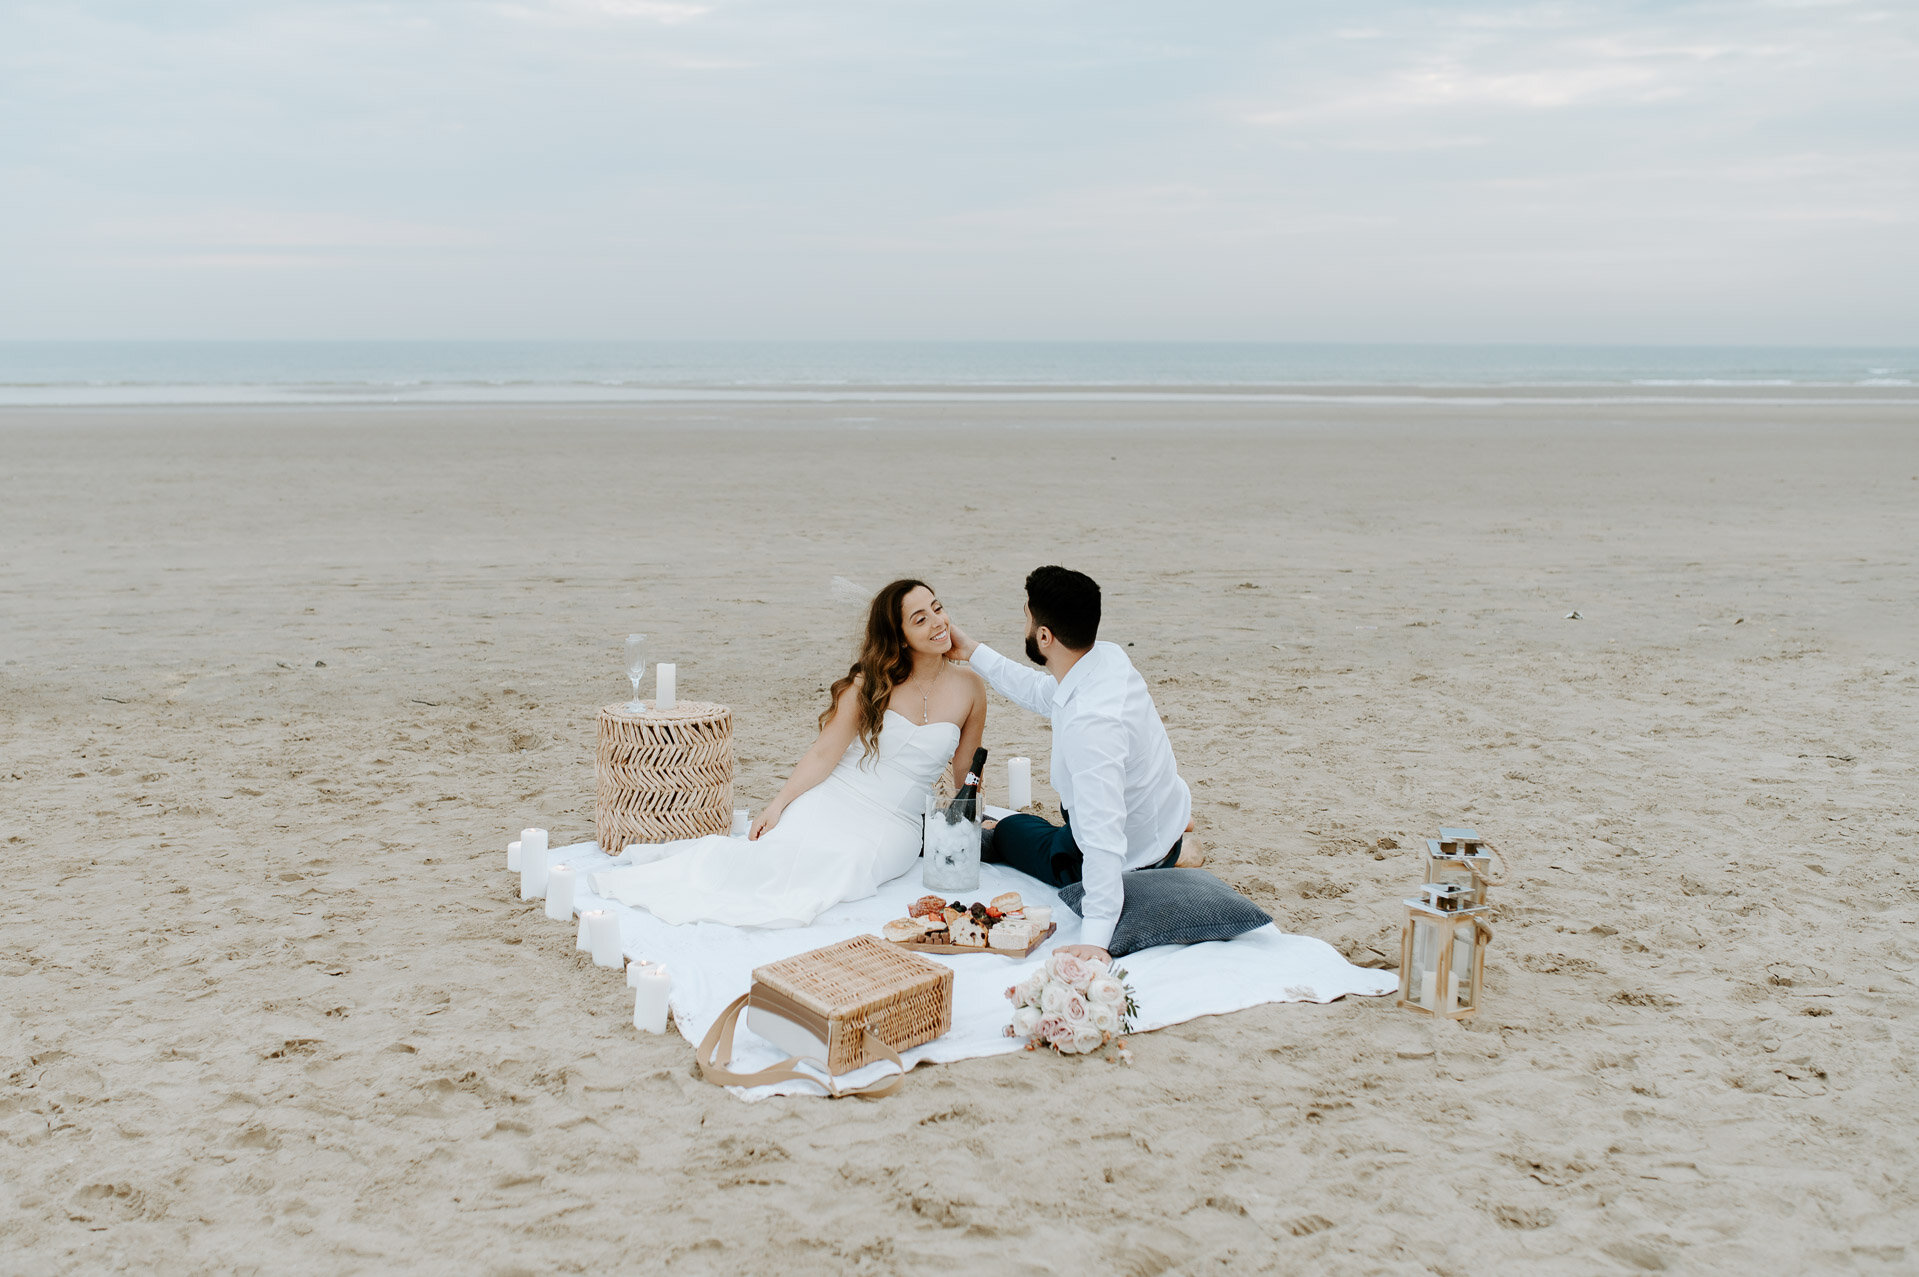 Demiana and Goergeuos - Camber Sands Golden Hour Beach Shoot - Laura Williams Photography-7.jpg